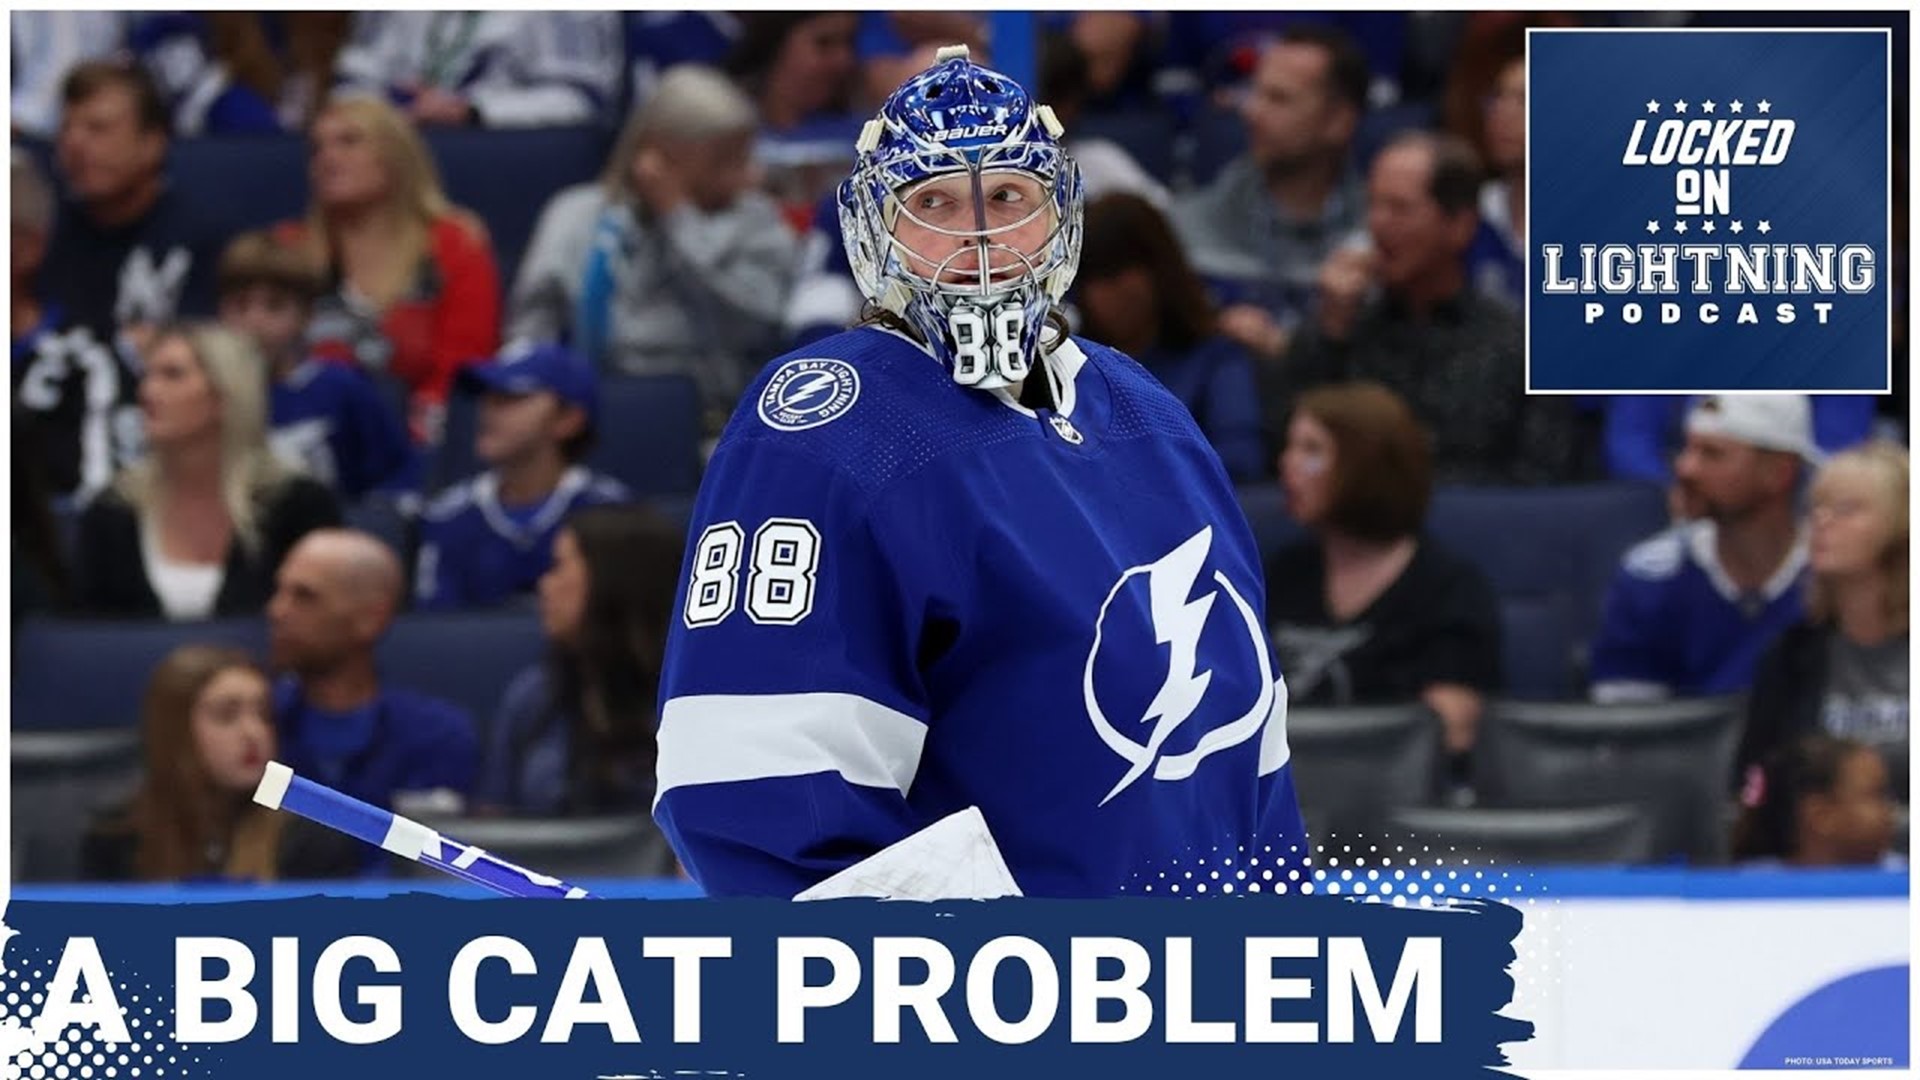 The Bolts ended falling in overtime to the Sabres last night in what was another disappointing loss. After the lackluster loss, we also look at Andrei Vasilevskiy's